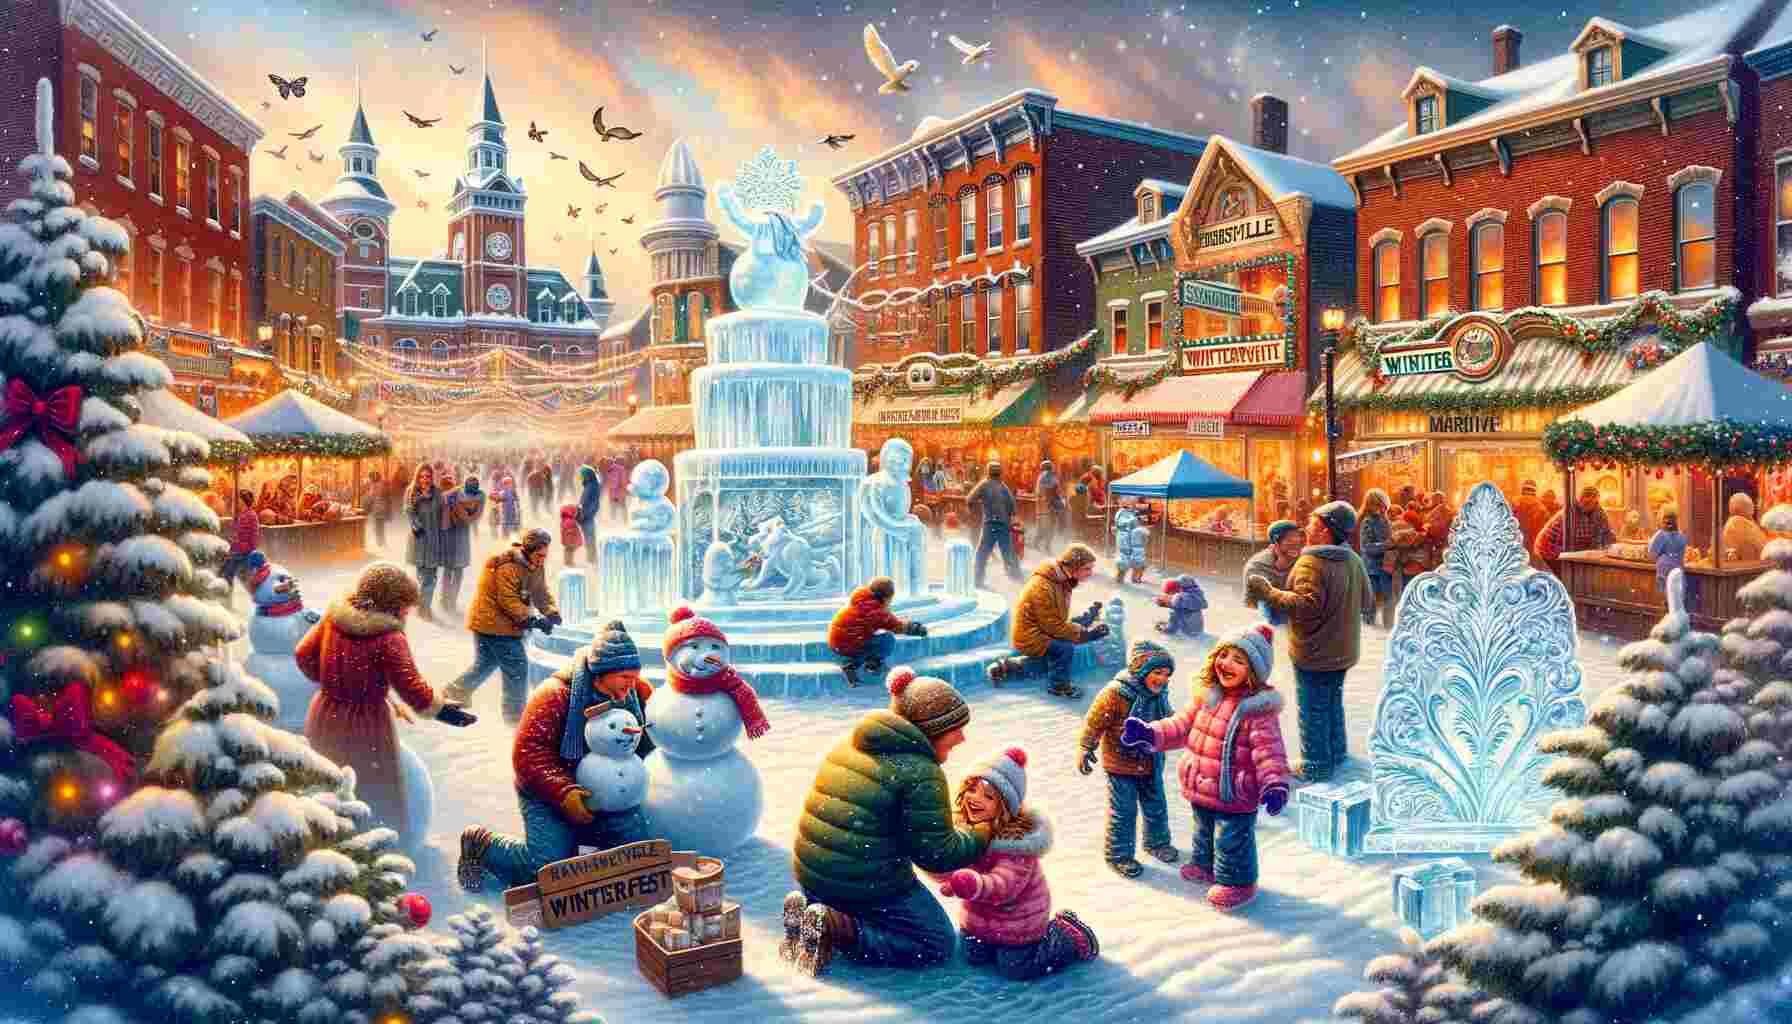 Here's the featured image for “Celebrating Winter in Pennsylvania A Guide to the 2024 Marienville WinterFest and More” capturing the vibrant winter scene in Marienville, Pennsylvania during the WinterFest. The image showcases the festive and community spirit of the event.